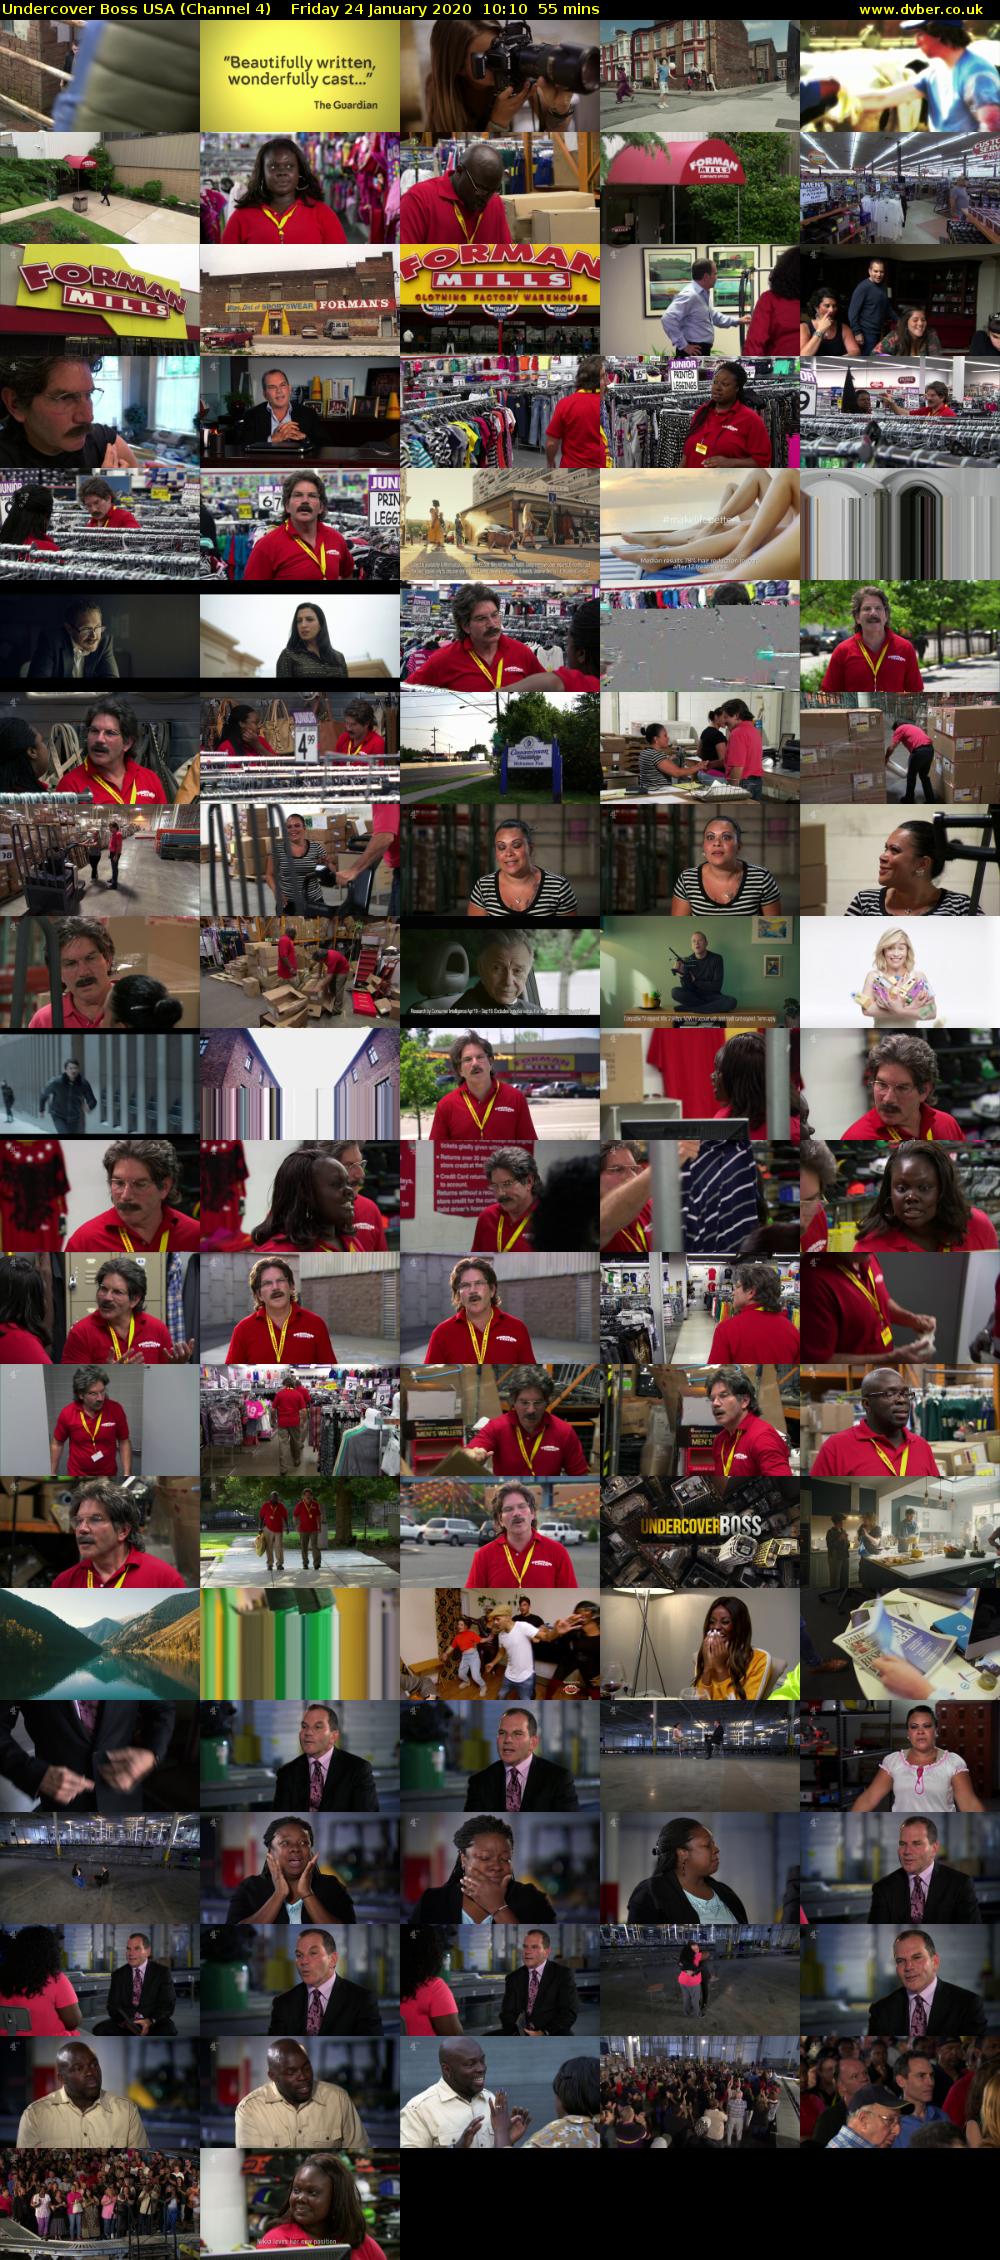 Undercover Boss USA (Channel 4) Friday 24 January 2020 10:10 - 11:05